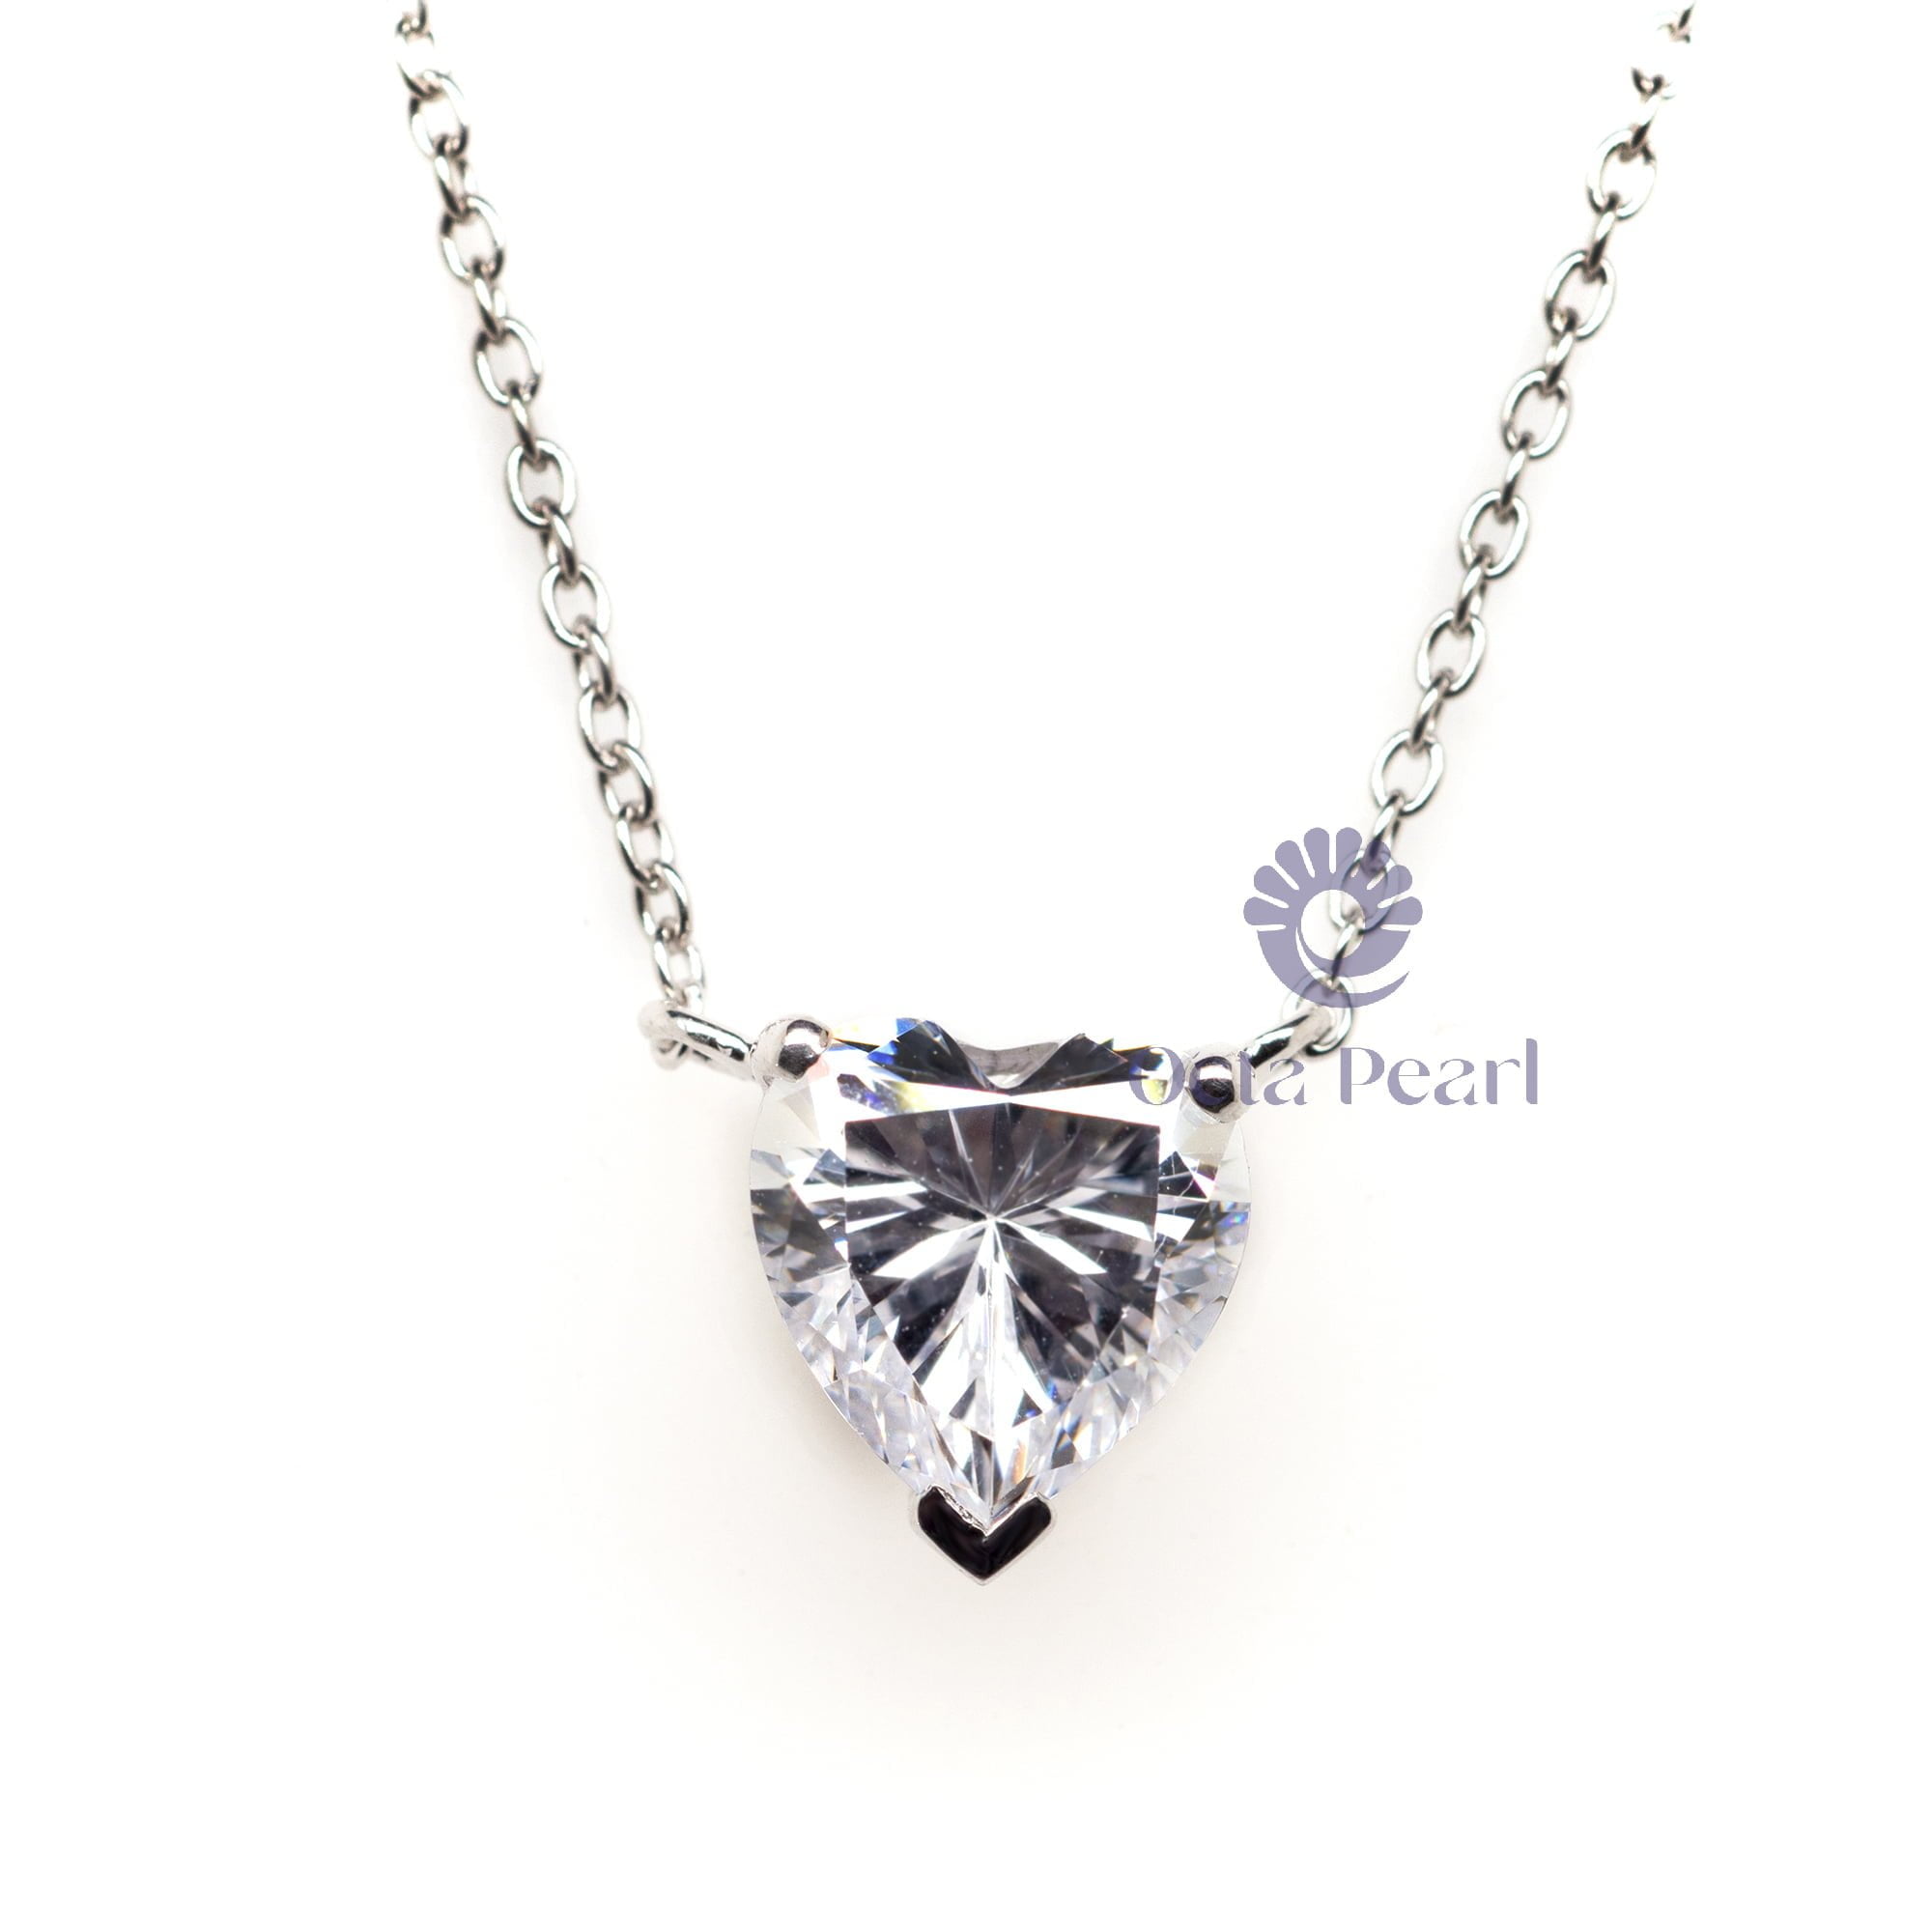 Women's 9 MM Heart Cut White CZ Stone 925 Silver Gorgeous Beautiful Pendant Necklace For Valentine's Gift